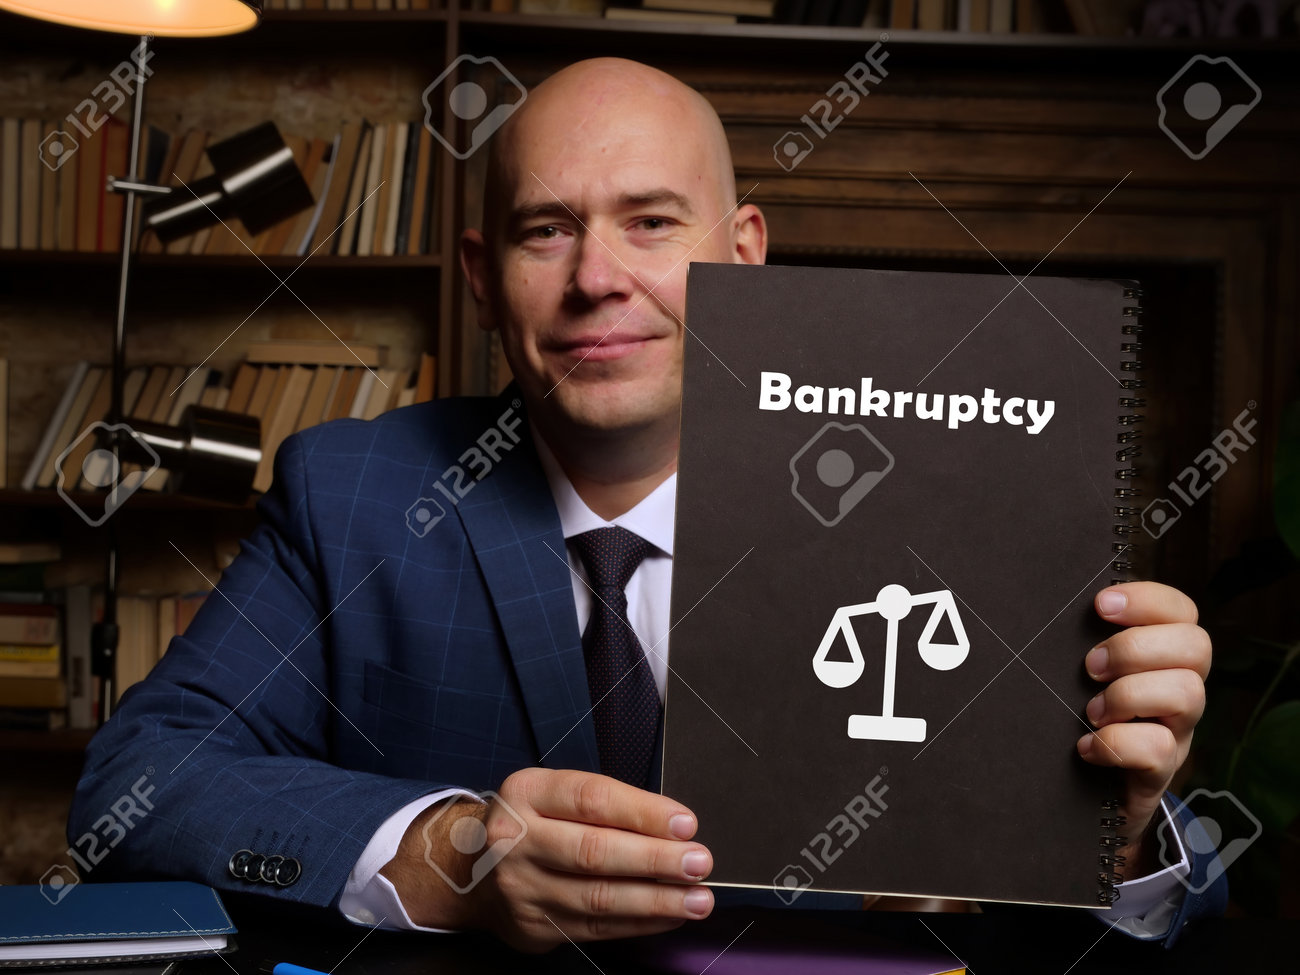 bankruptcy-law